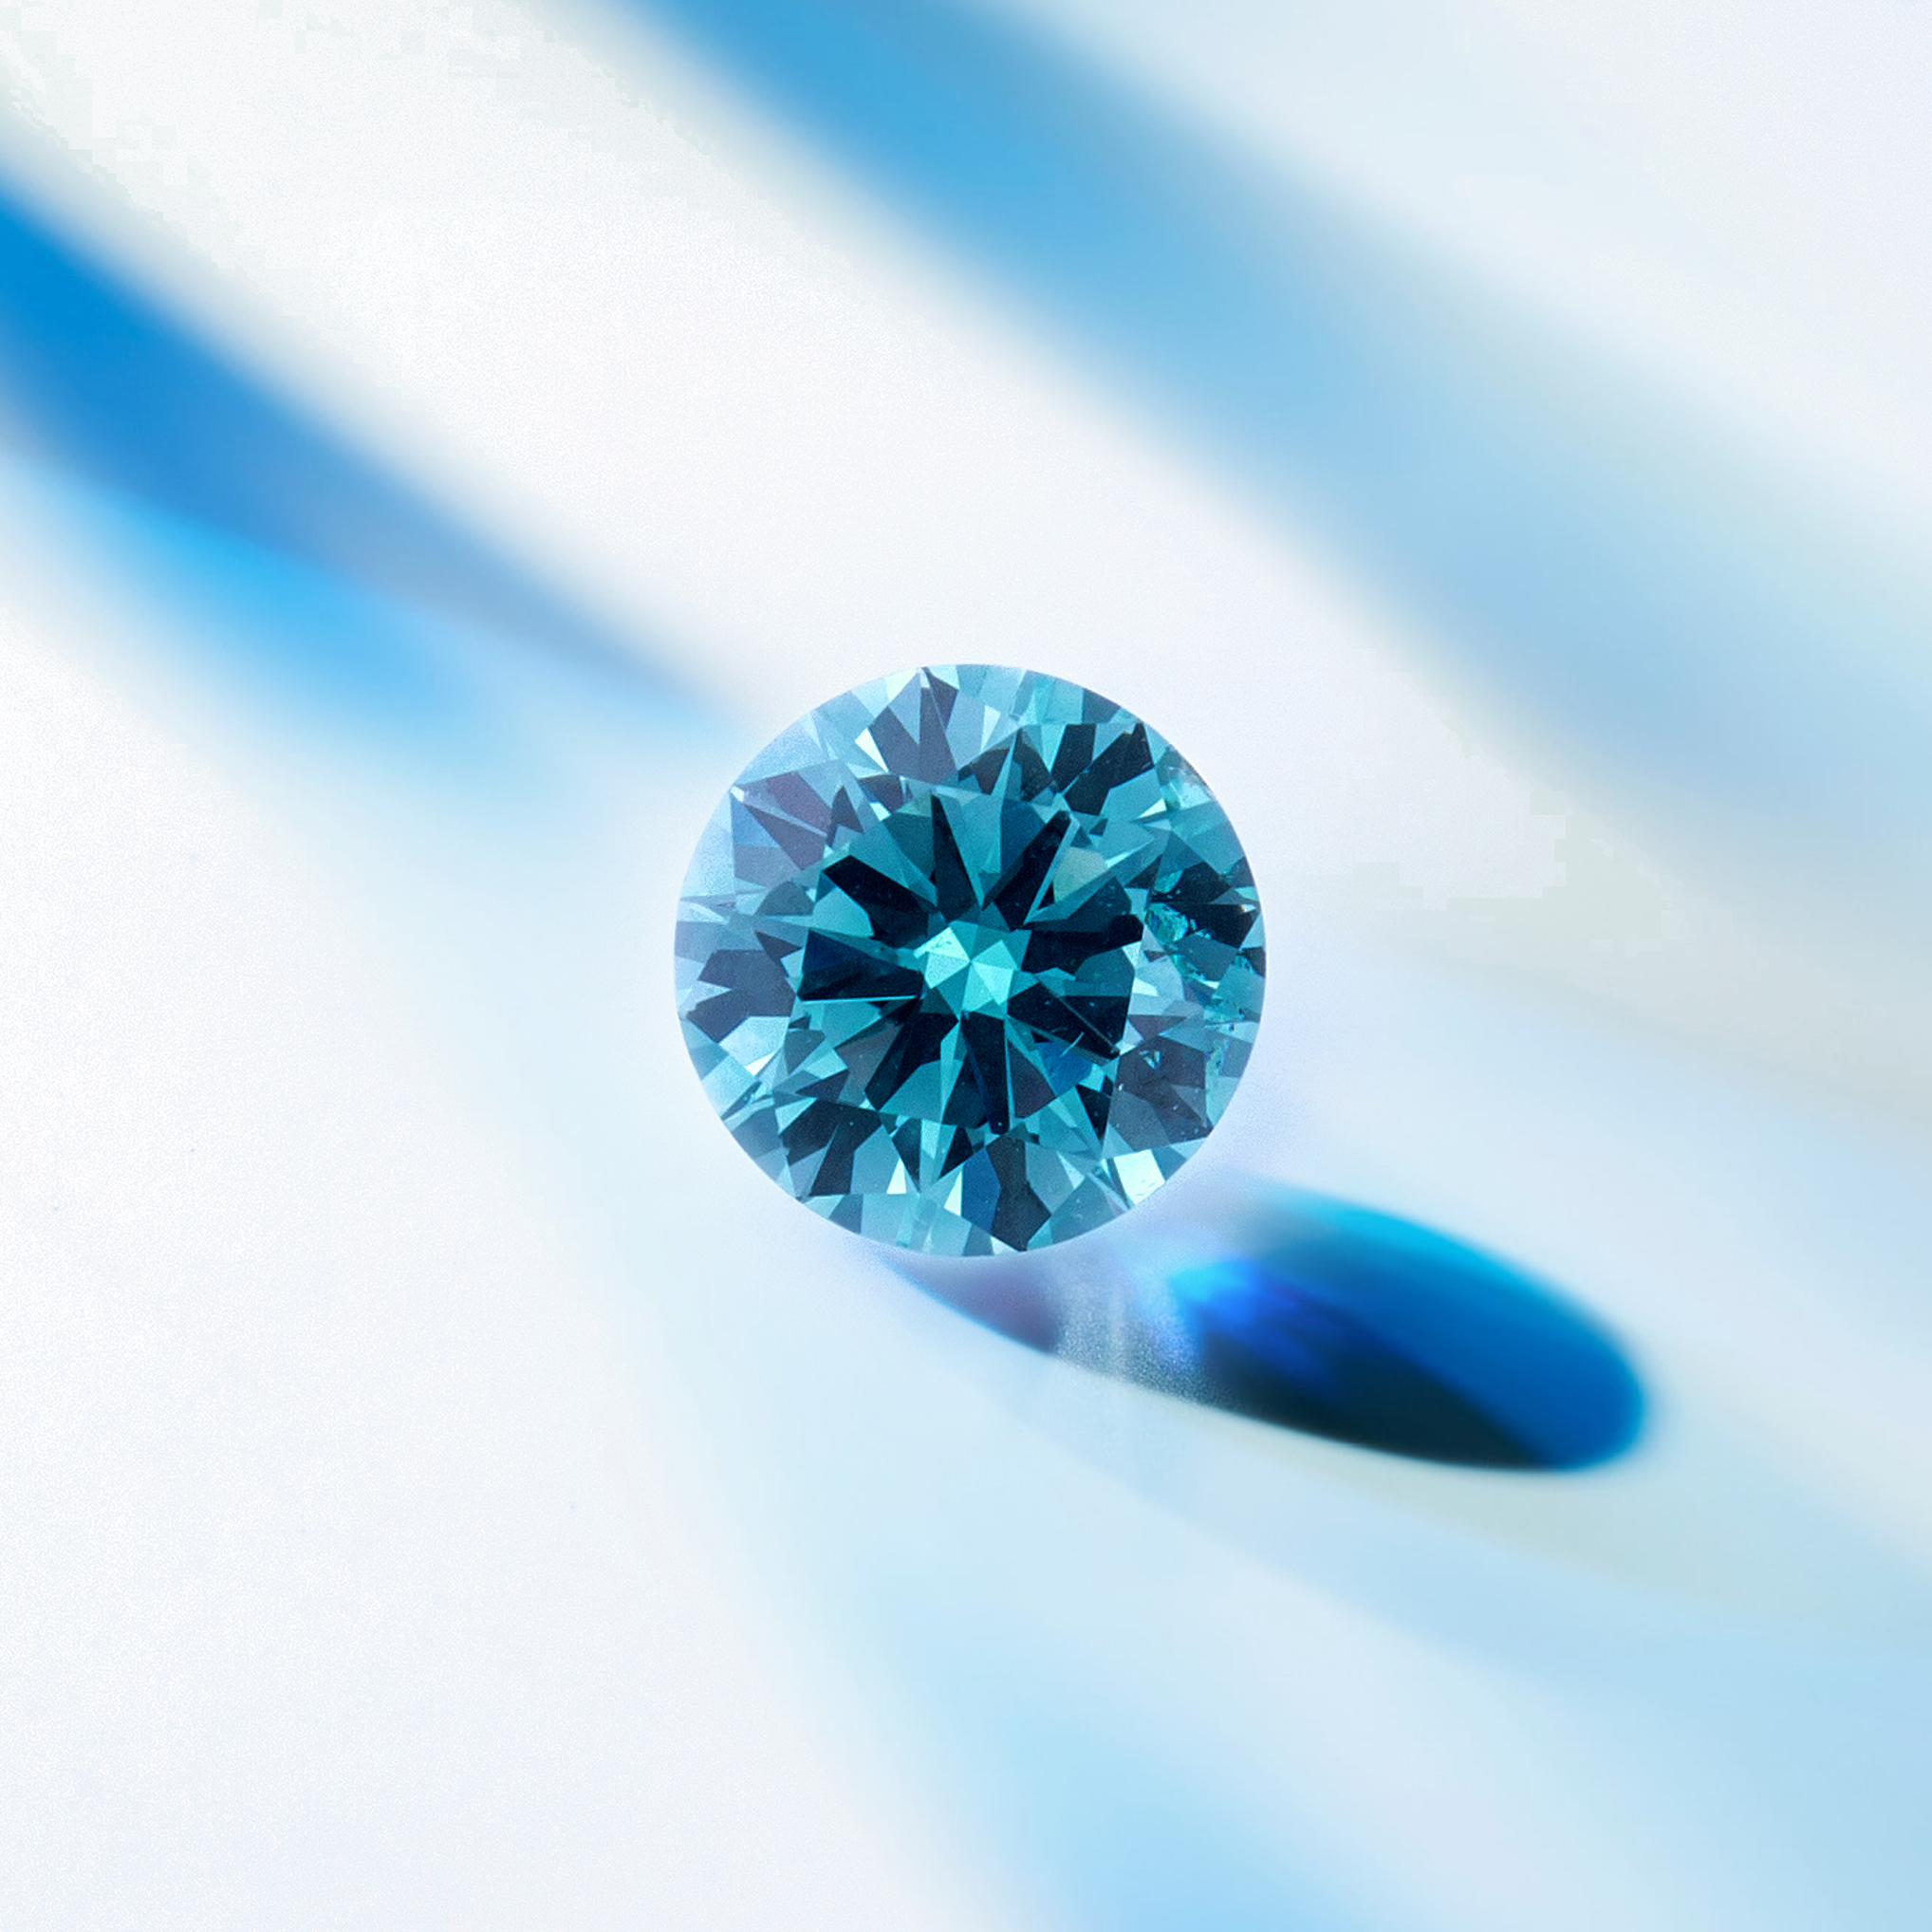 Recommendations for Prospective Buyers: Maximizing Value in Blue Diamond Purchases